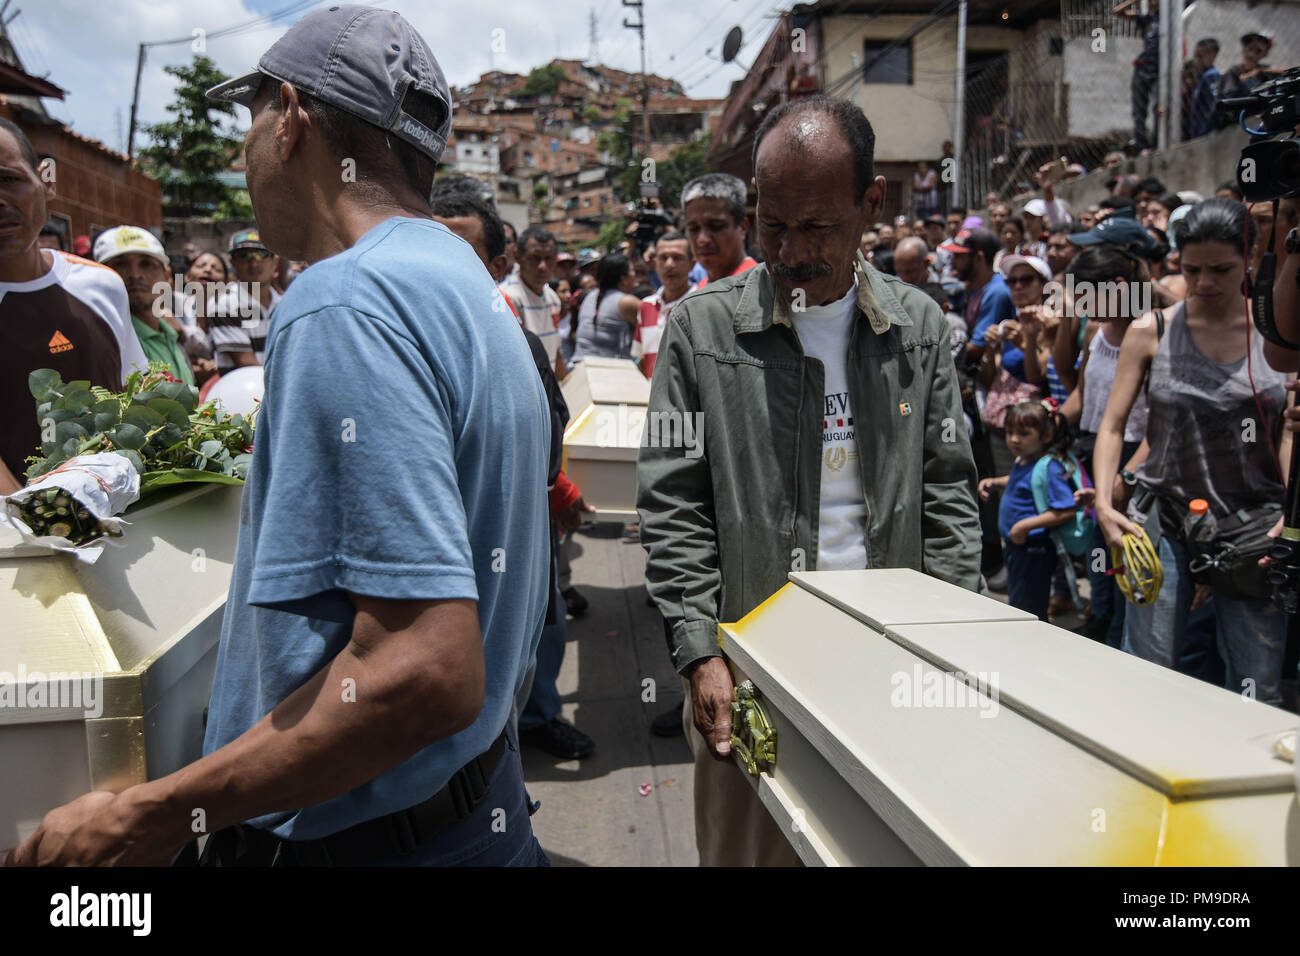 Caracas, Distrito Capital, Venezuela. 17th Sep, 2018. Relatives seen carrying the coffins of the victims during the funeral. The victims, Roxana Conde (10 years old), Julianyerli Conde (4 years old), JonÃ¡s Jonneiker Conde (1 year old) and Humberto Ruiz (10 years old), were murdered last September 14th in El 70 in Caracas, Venezuela. The perpetrator was identified as José Manuel Morgado (48 years old) who was killed the same night after a shootout with police officers (CICPC) while fleeing in Ocumare del Tuy, Miranda state, Venezuela. The suspect raped the children before killing them Stock Photo